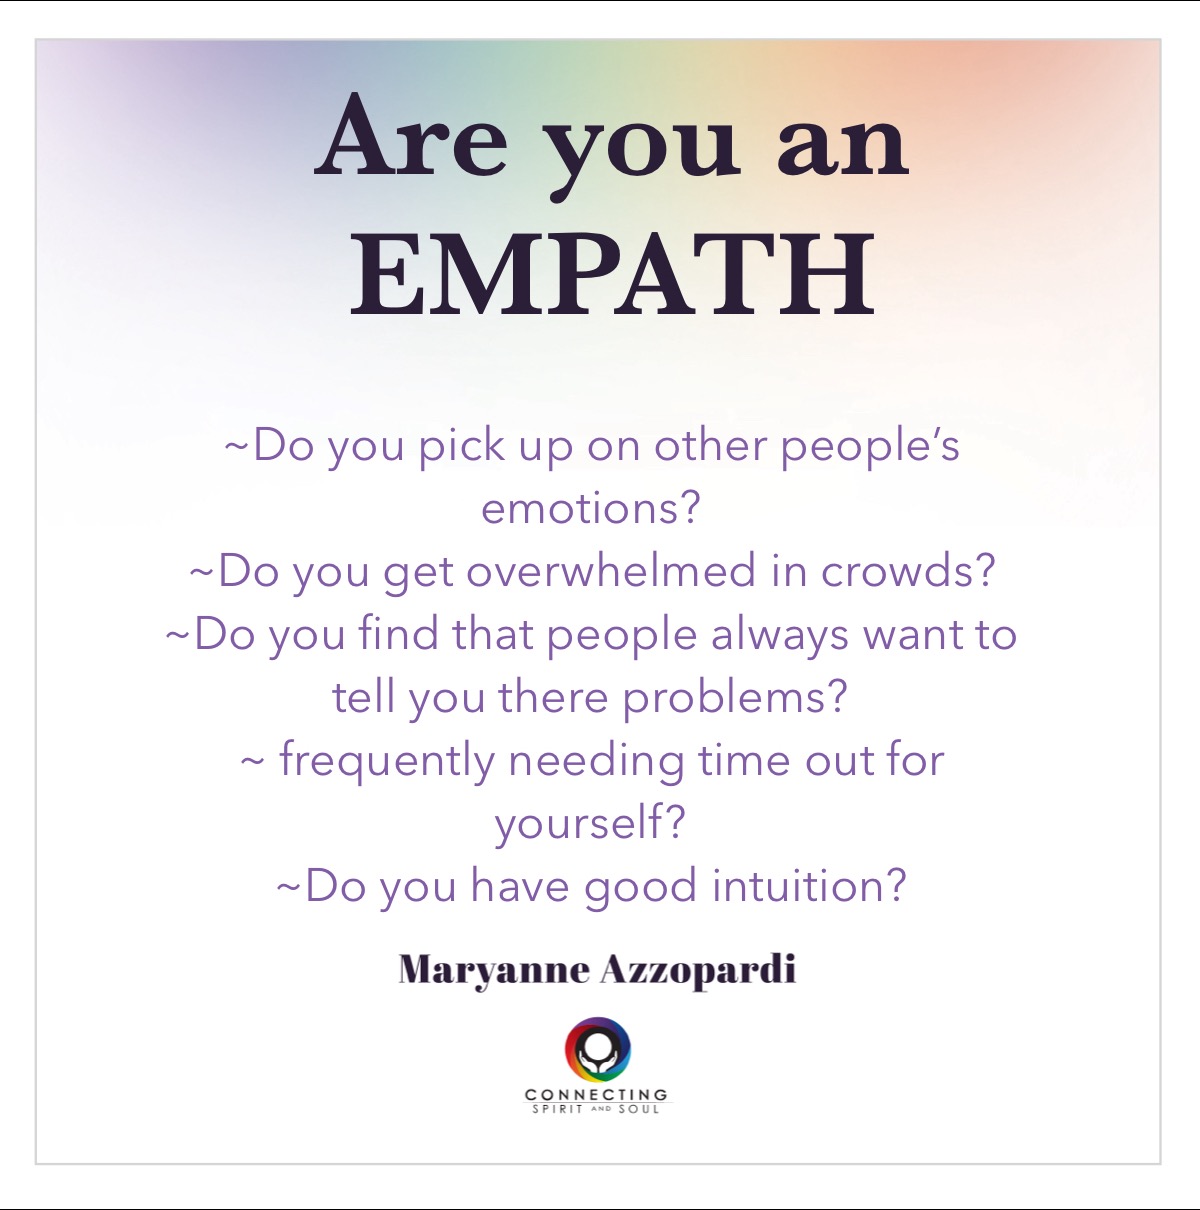 What Is an Empath and How Do You Know If You Are One?